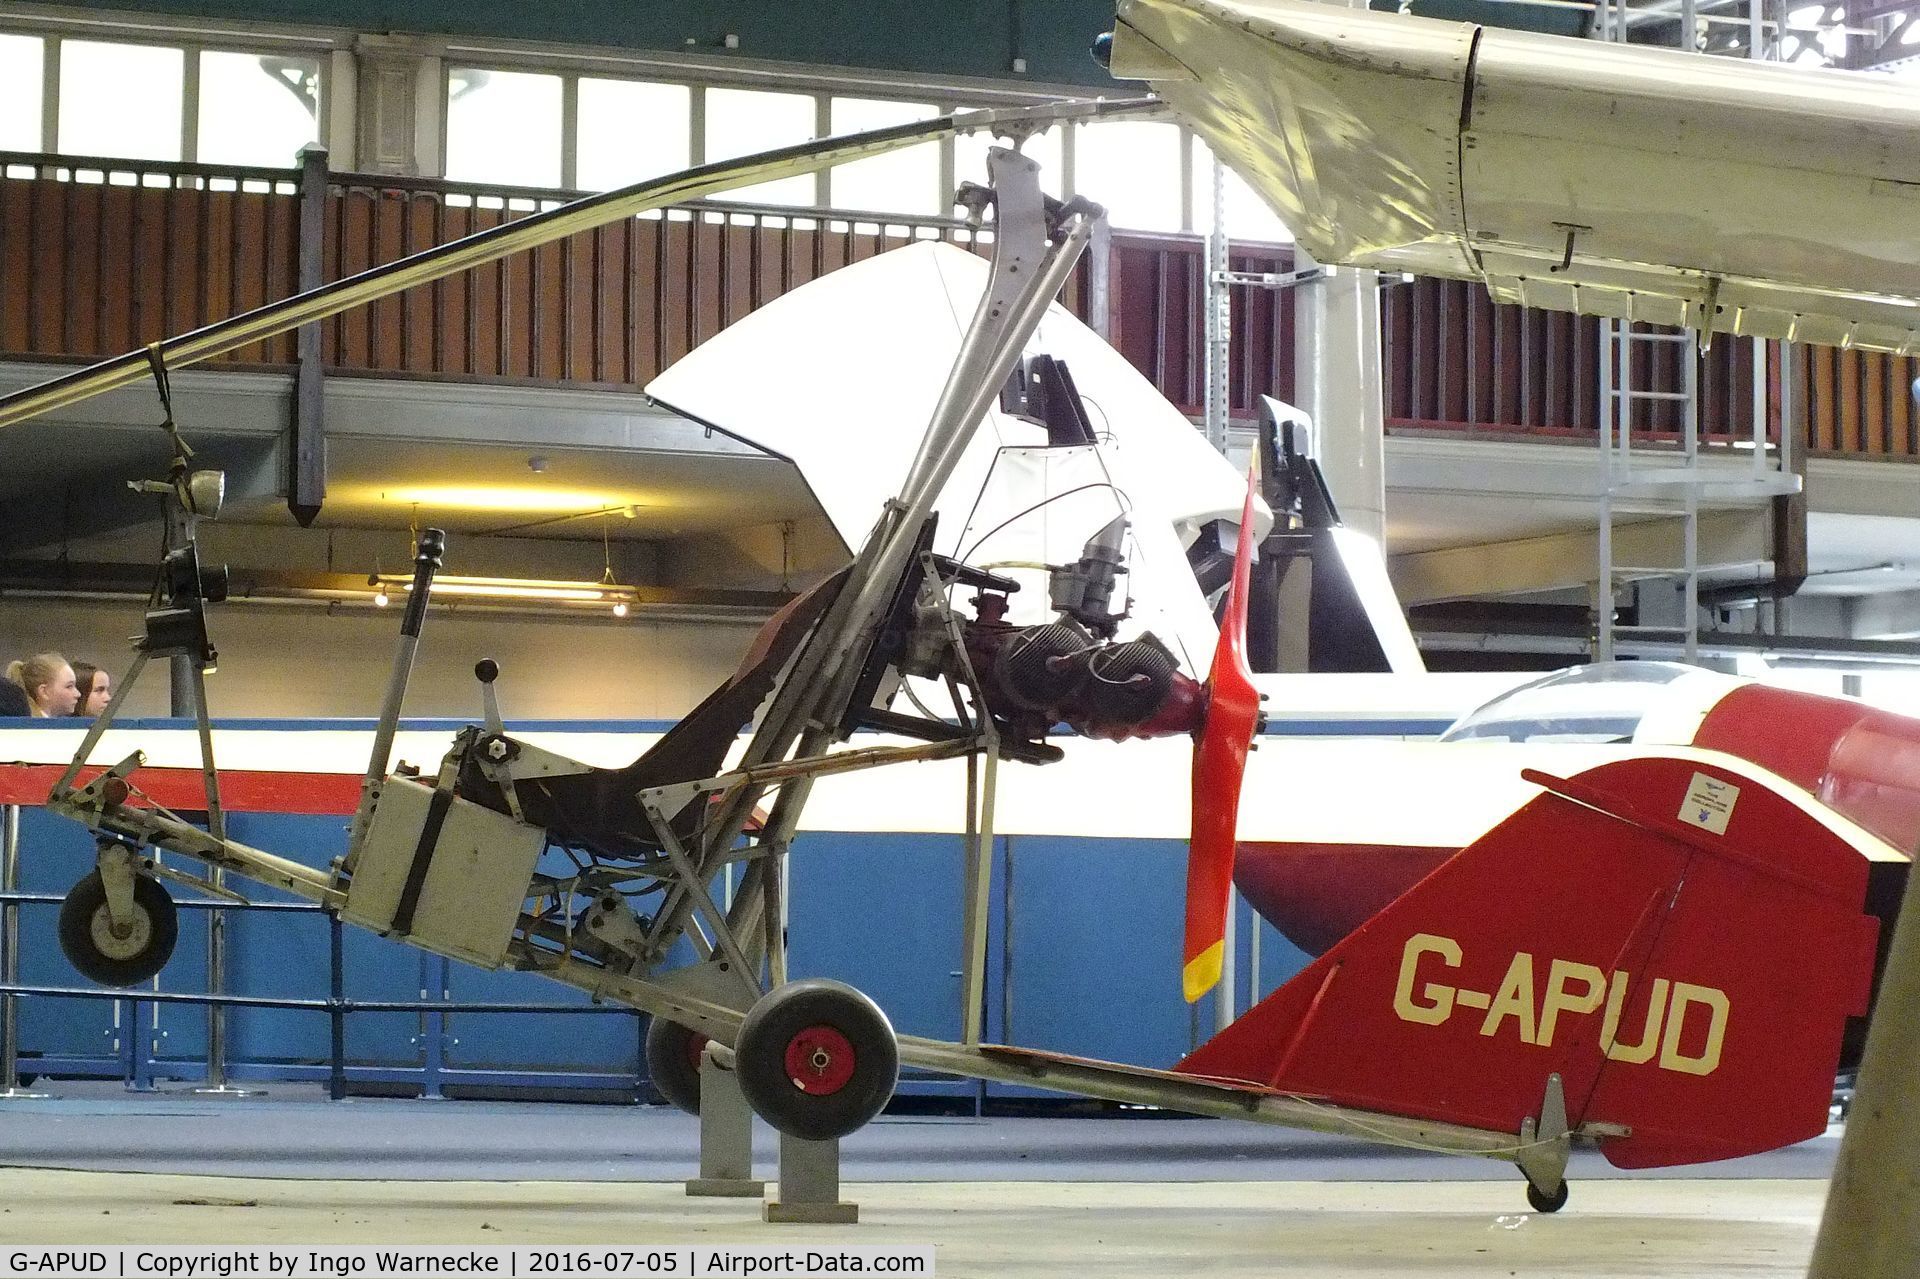 G-APUD, Bensen B-7MC Gyrocopter C/N 01 (G-APUD), Bensen B-7MC Gyrocopter at the Museum of Science and Industry, Manchester